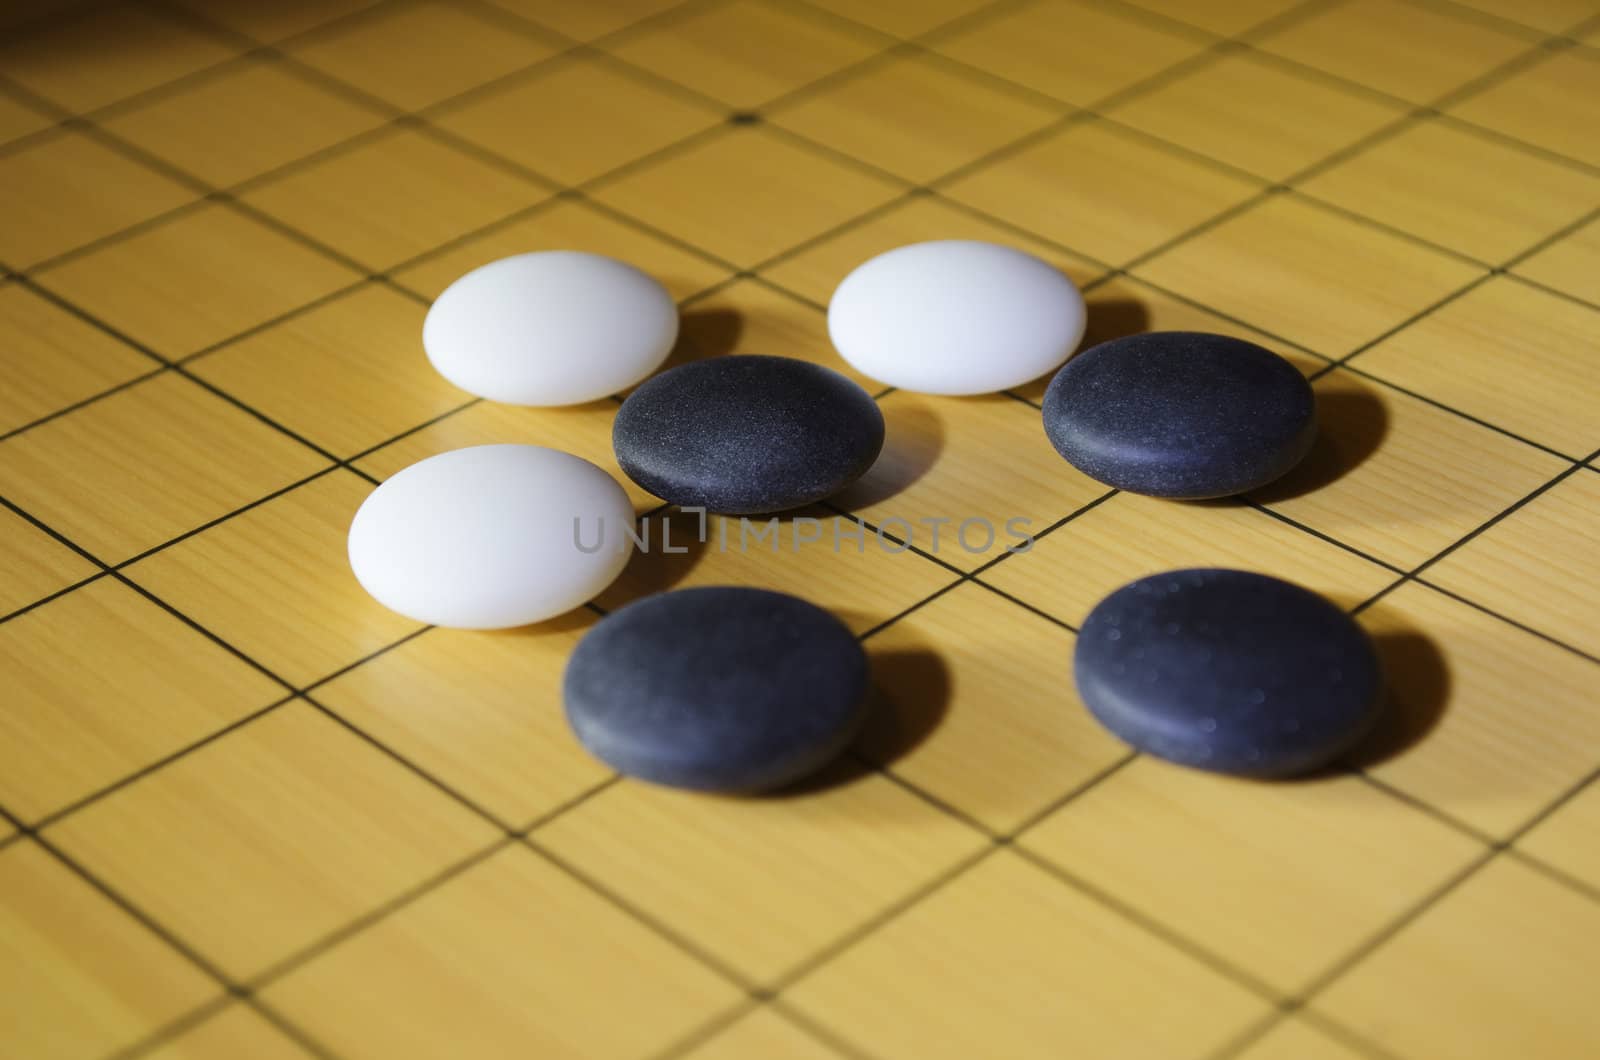 Classical ko situation in the traditional Asian game go. When white takes the black stone, black is not allowed to take back immediately, but must play elsewhere on the board.